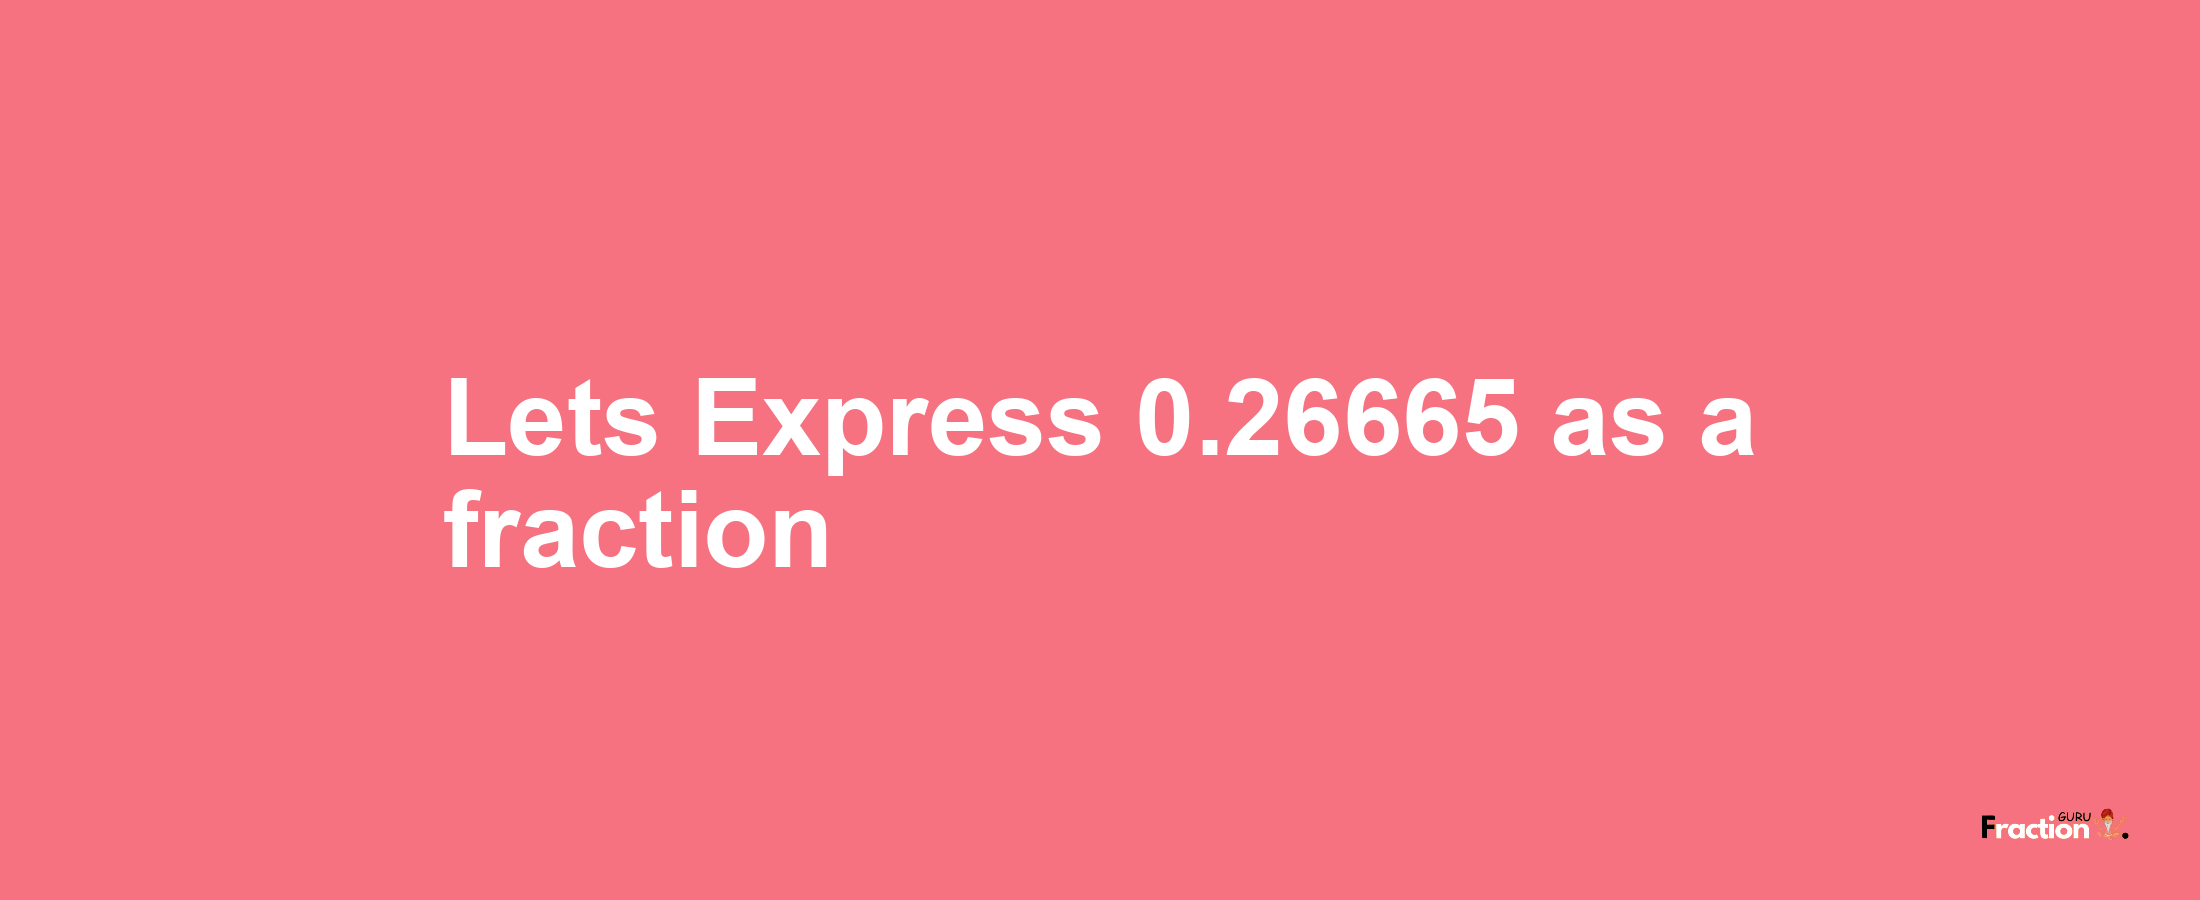 Lets Express 0.26665 as afraction